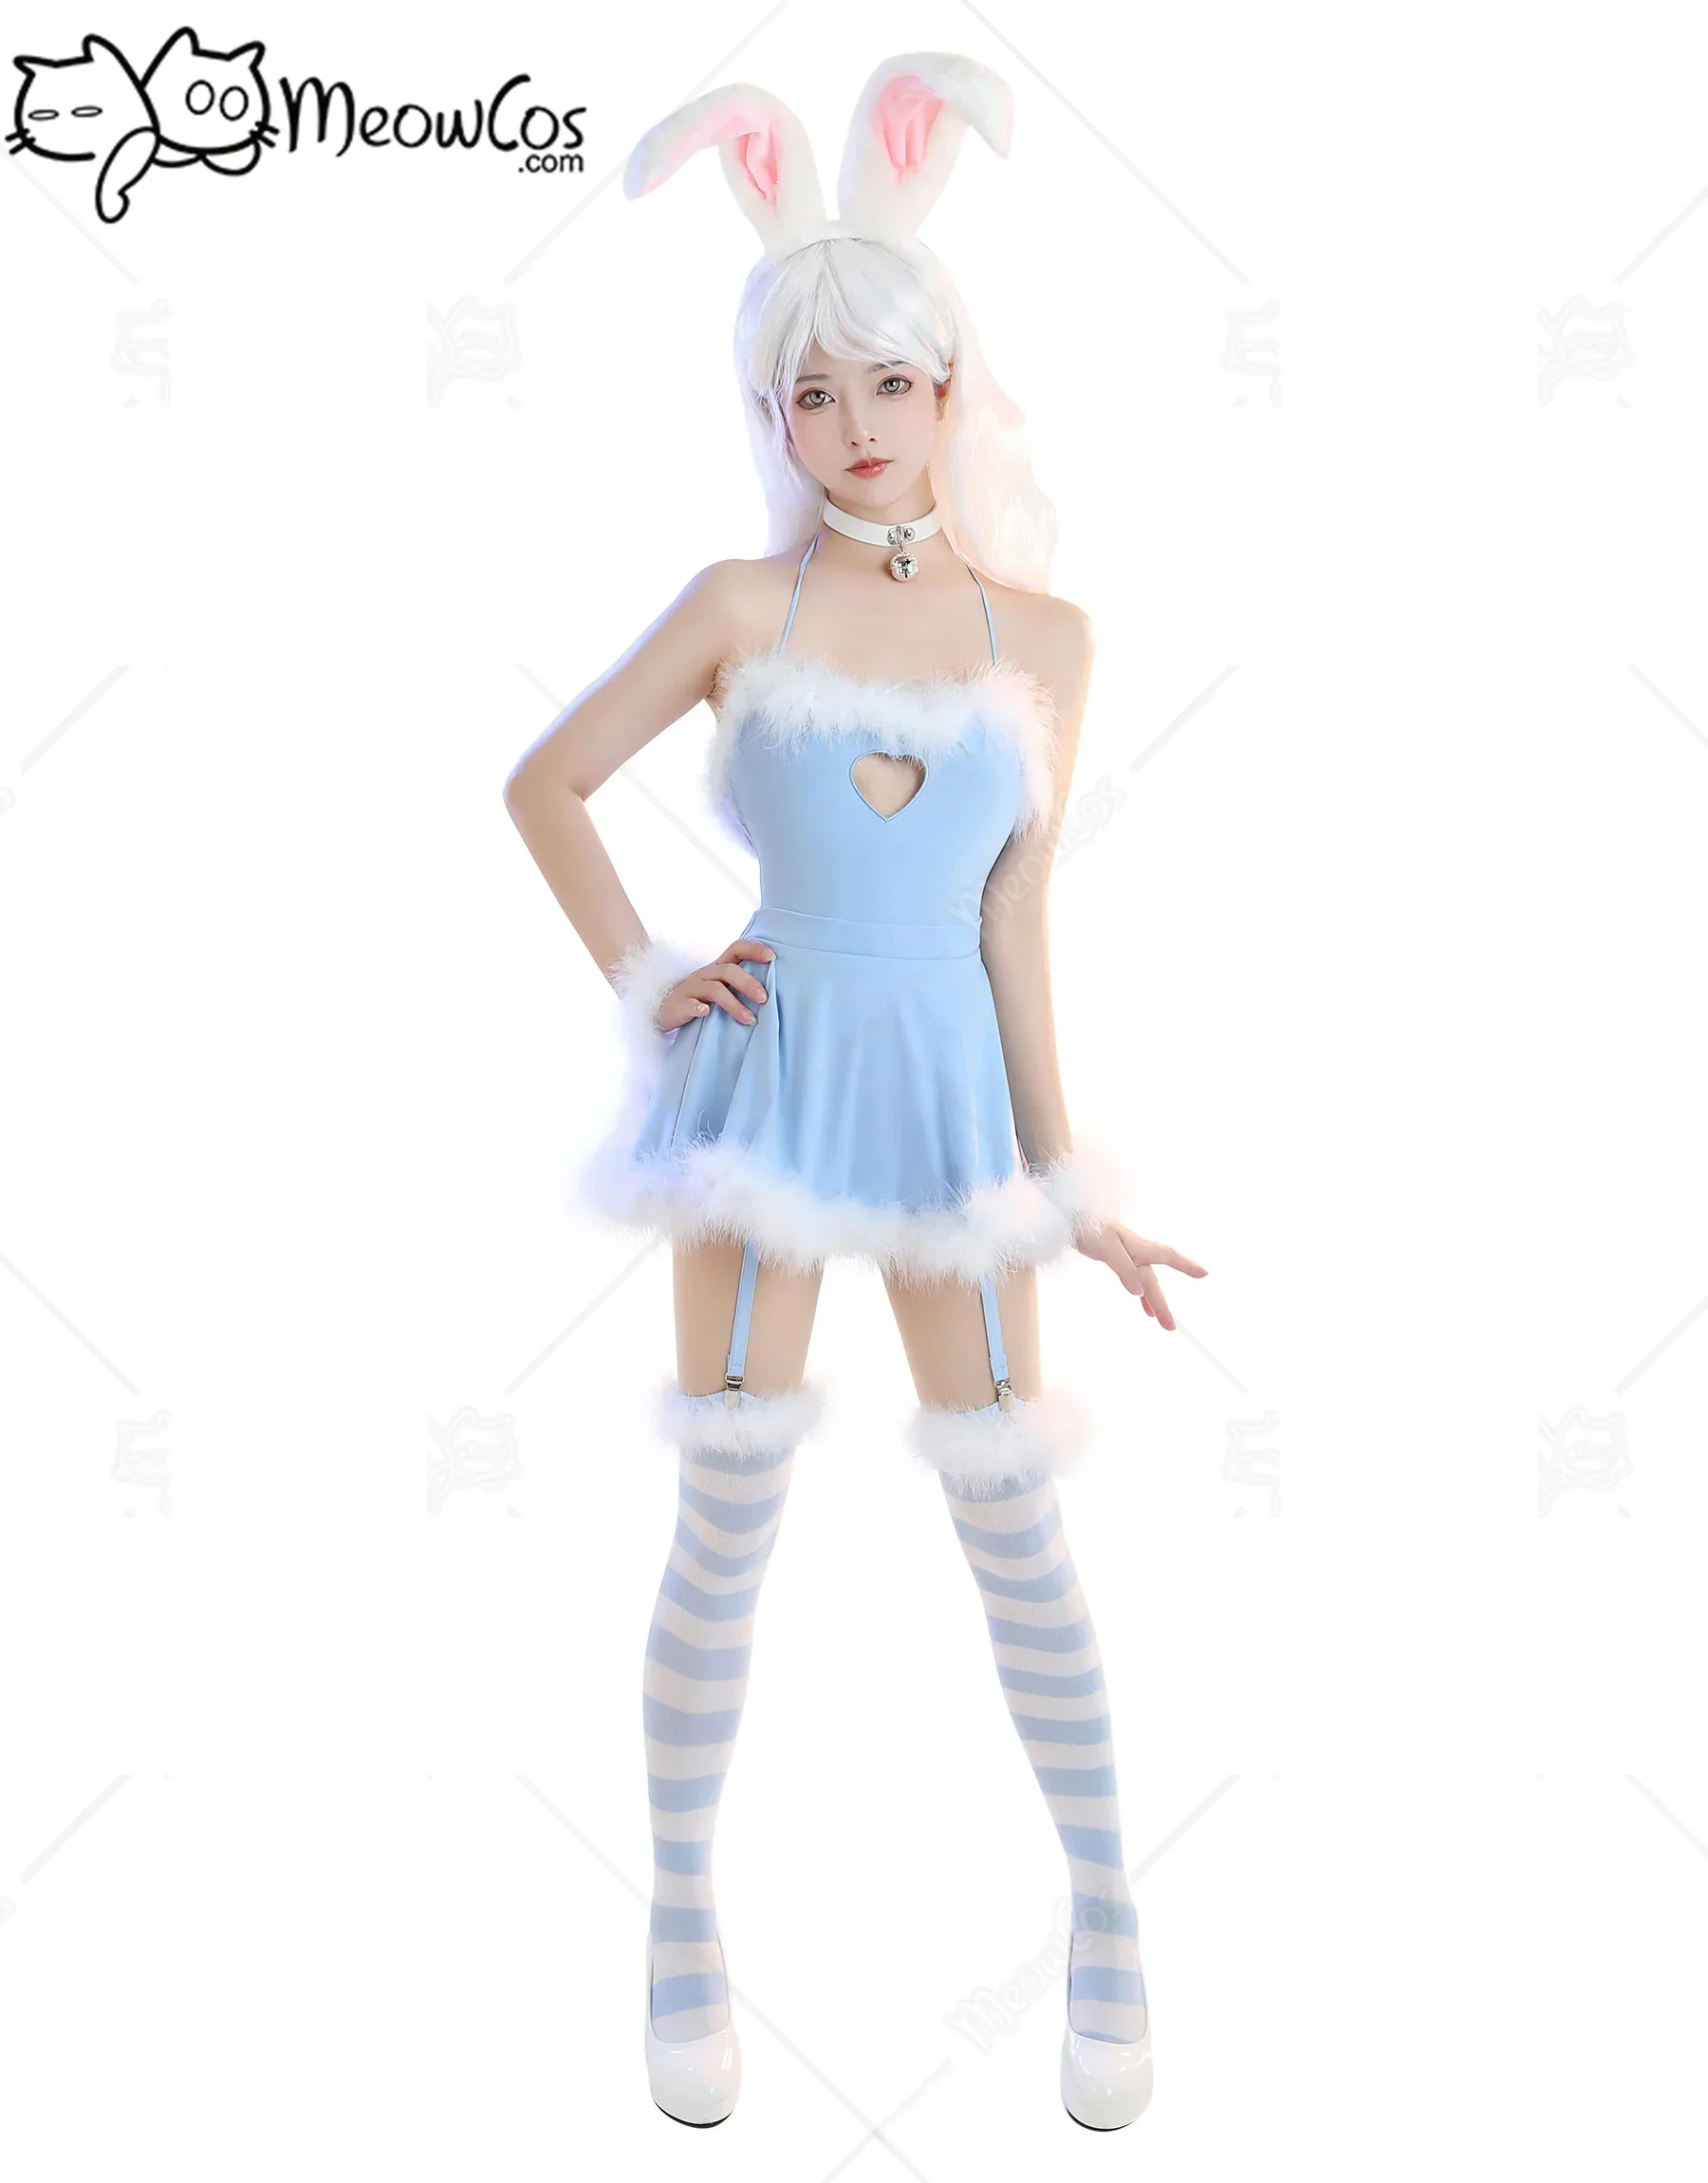 

Meowcos Women Bunny Girl Sexy Lingerie Set Homewear Blue Furry Heart Hollow Halter Bodysuit with Skirt and Striped Stockings